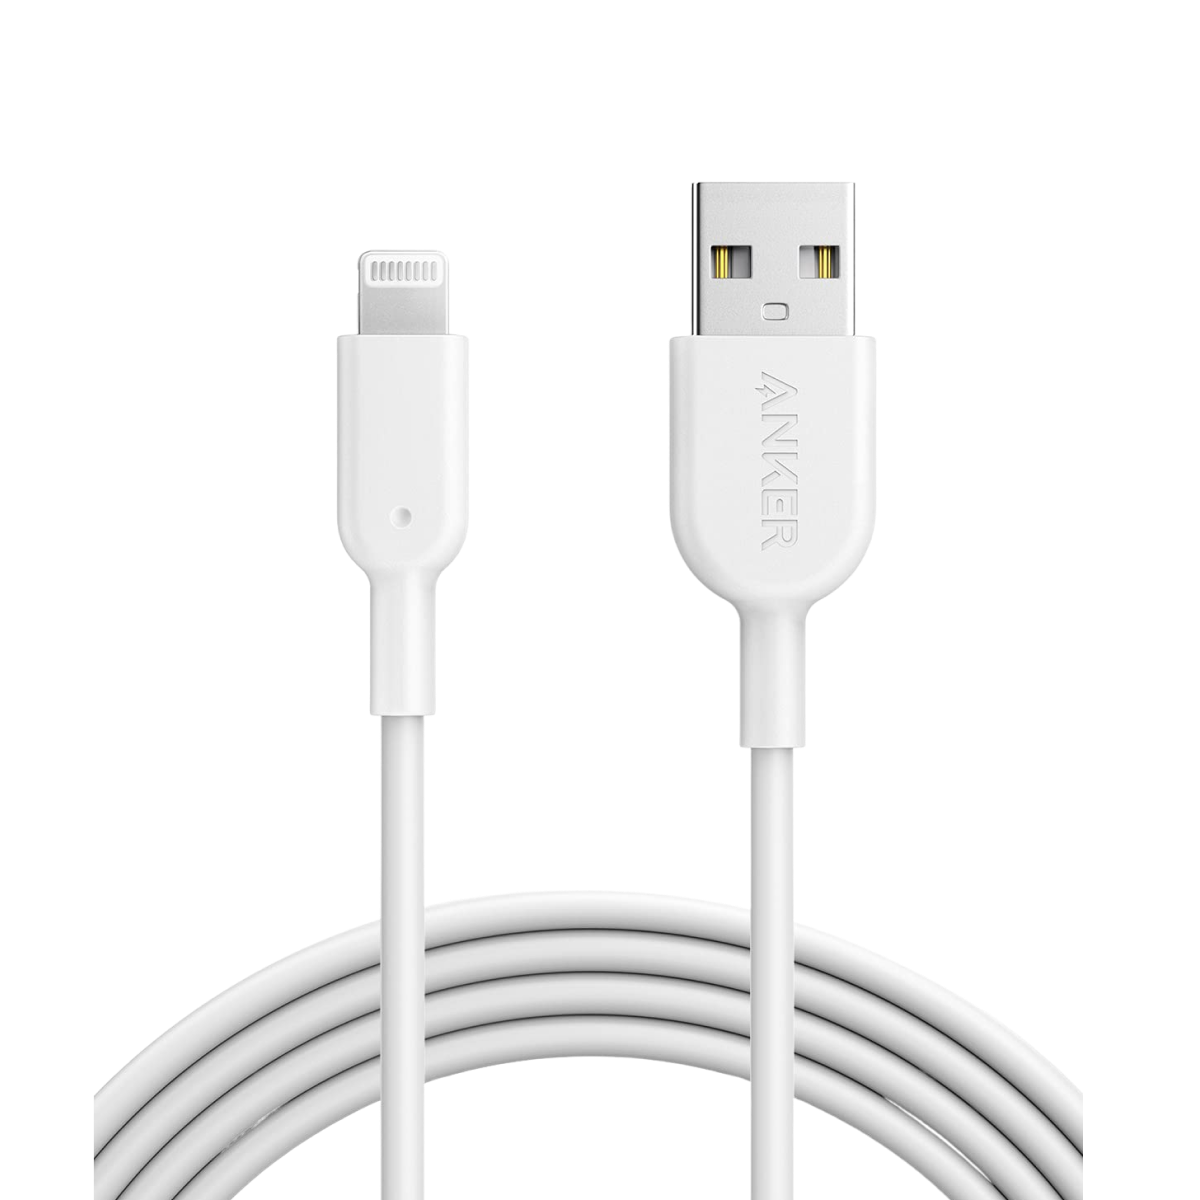 Anker 321 USB-C to Lightning Cable 6ft,White, for India